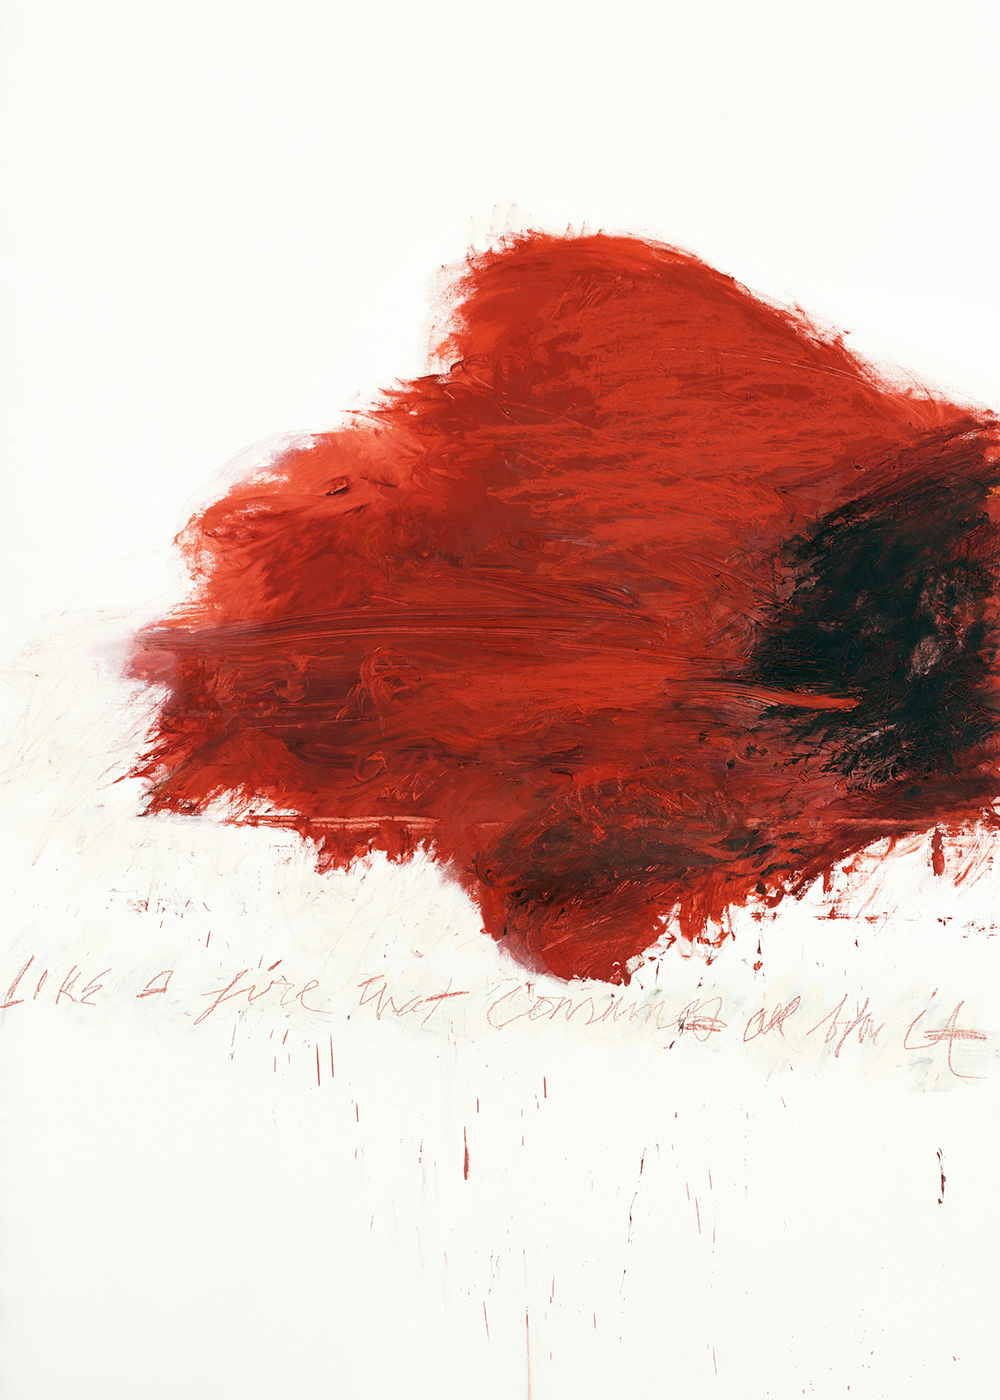 Cy Twombly, Fifty Days at Iliam: The Fire that Consumes All before It, 1978